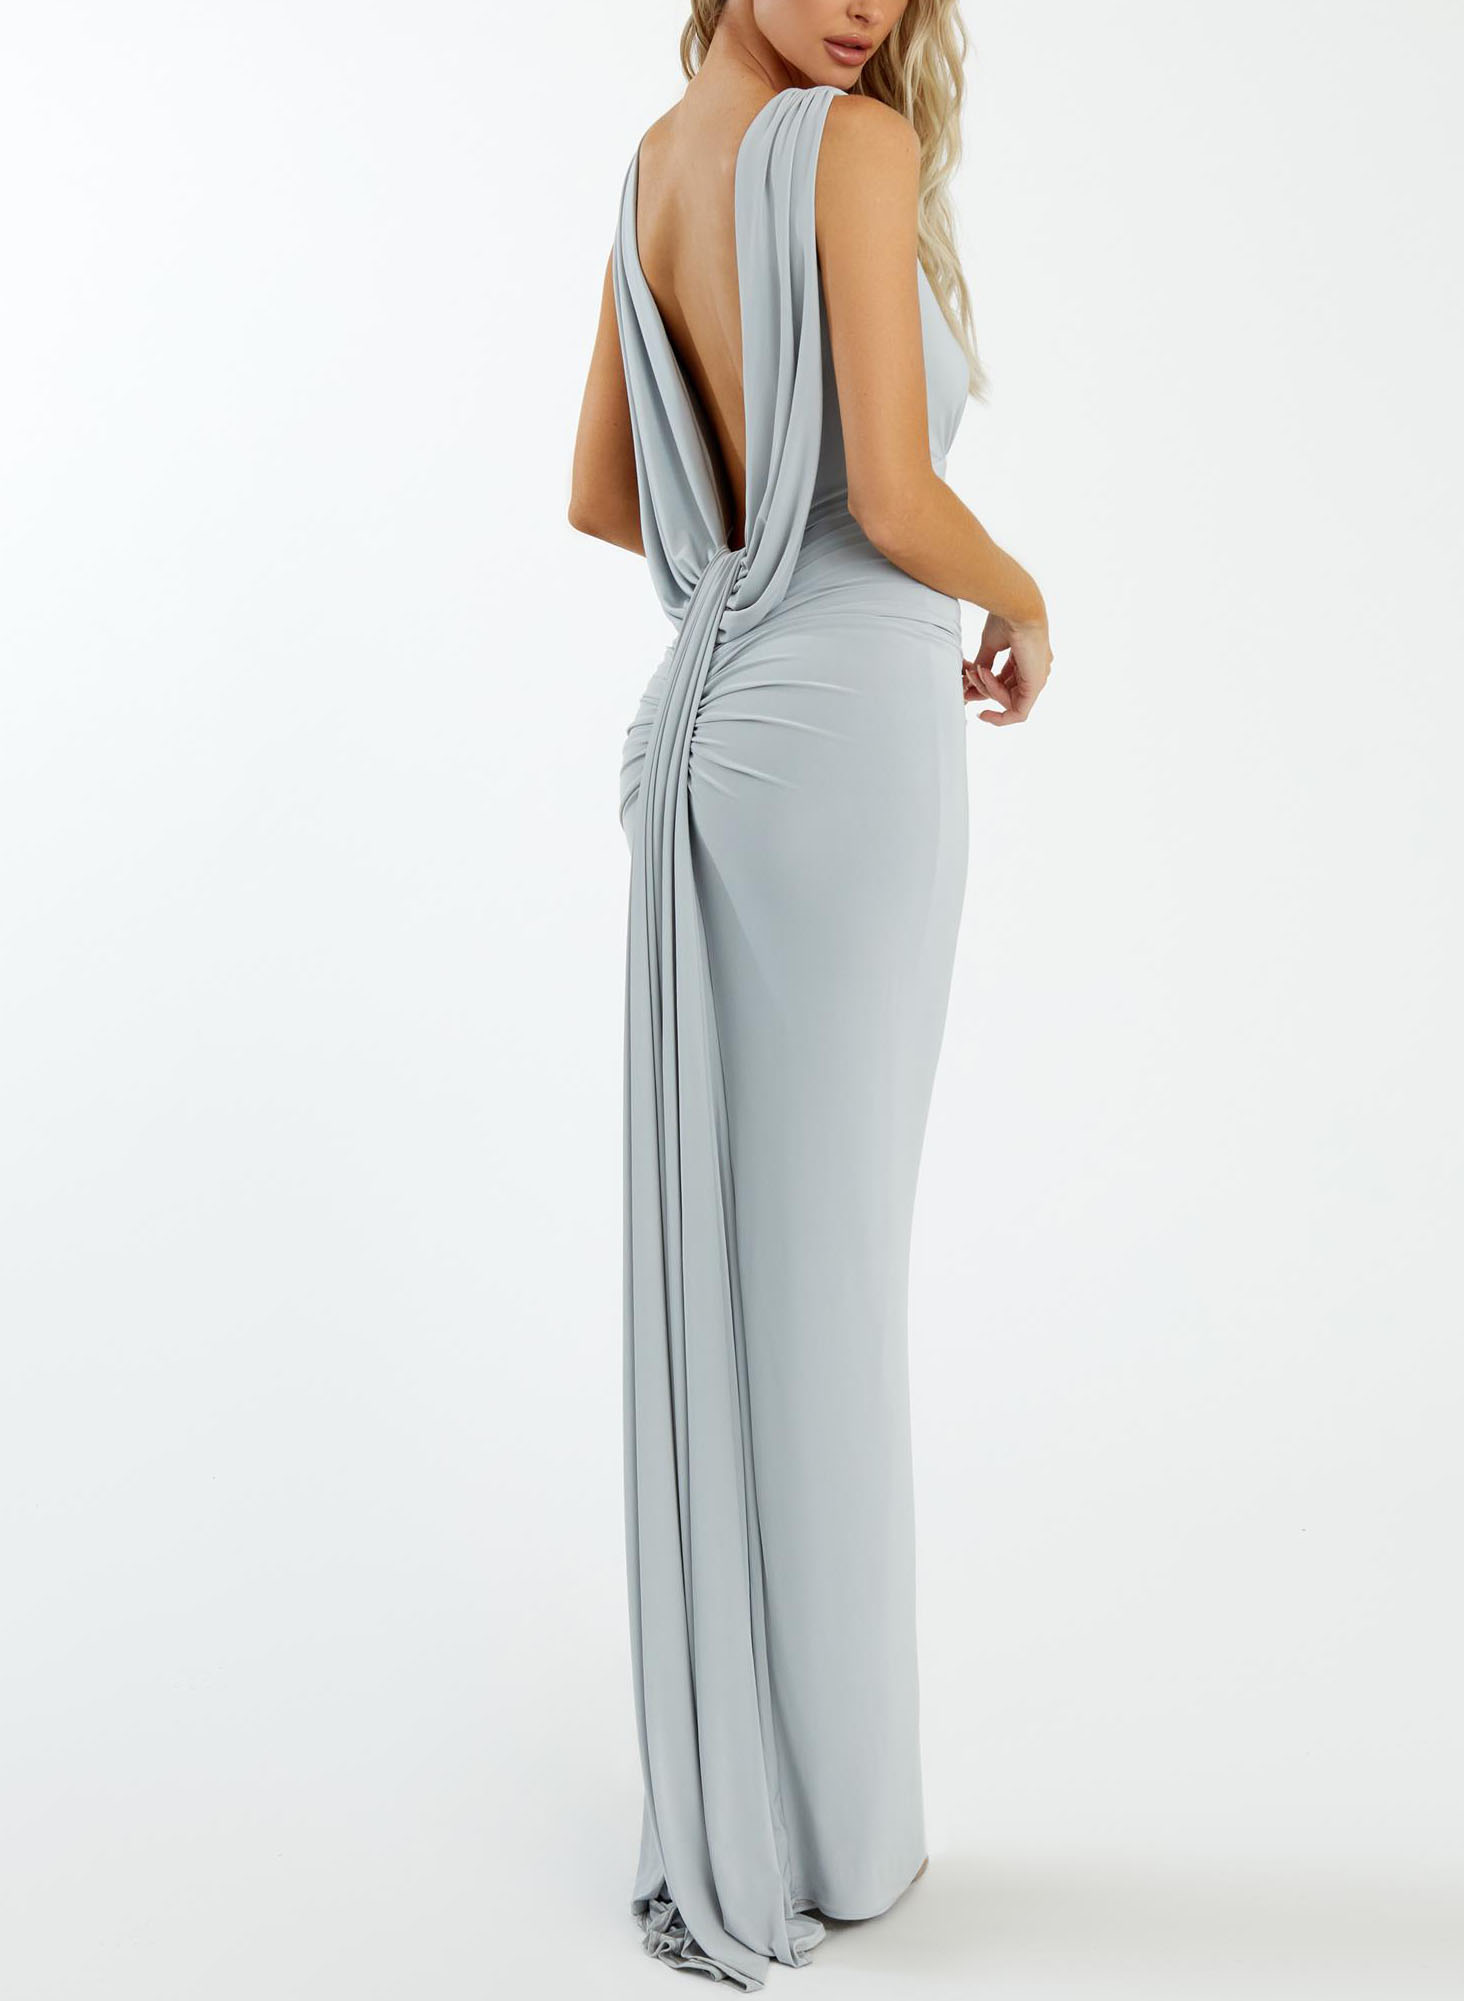 Sexy Backless Jersey Evening Dresses